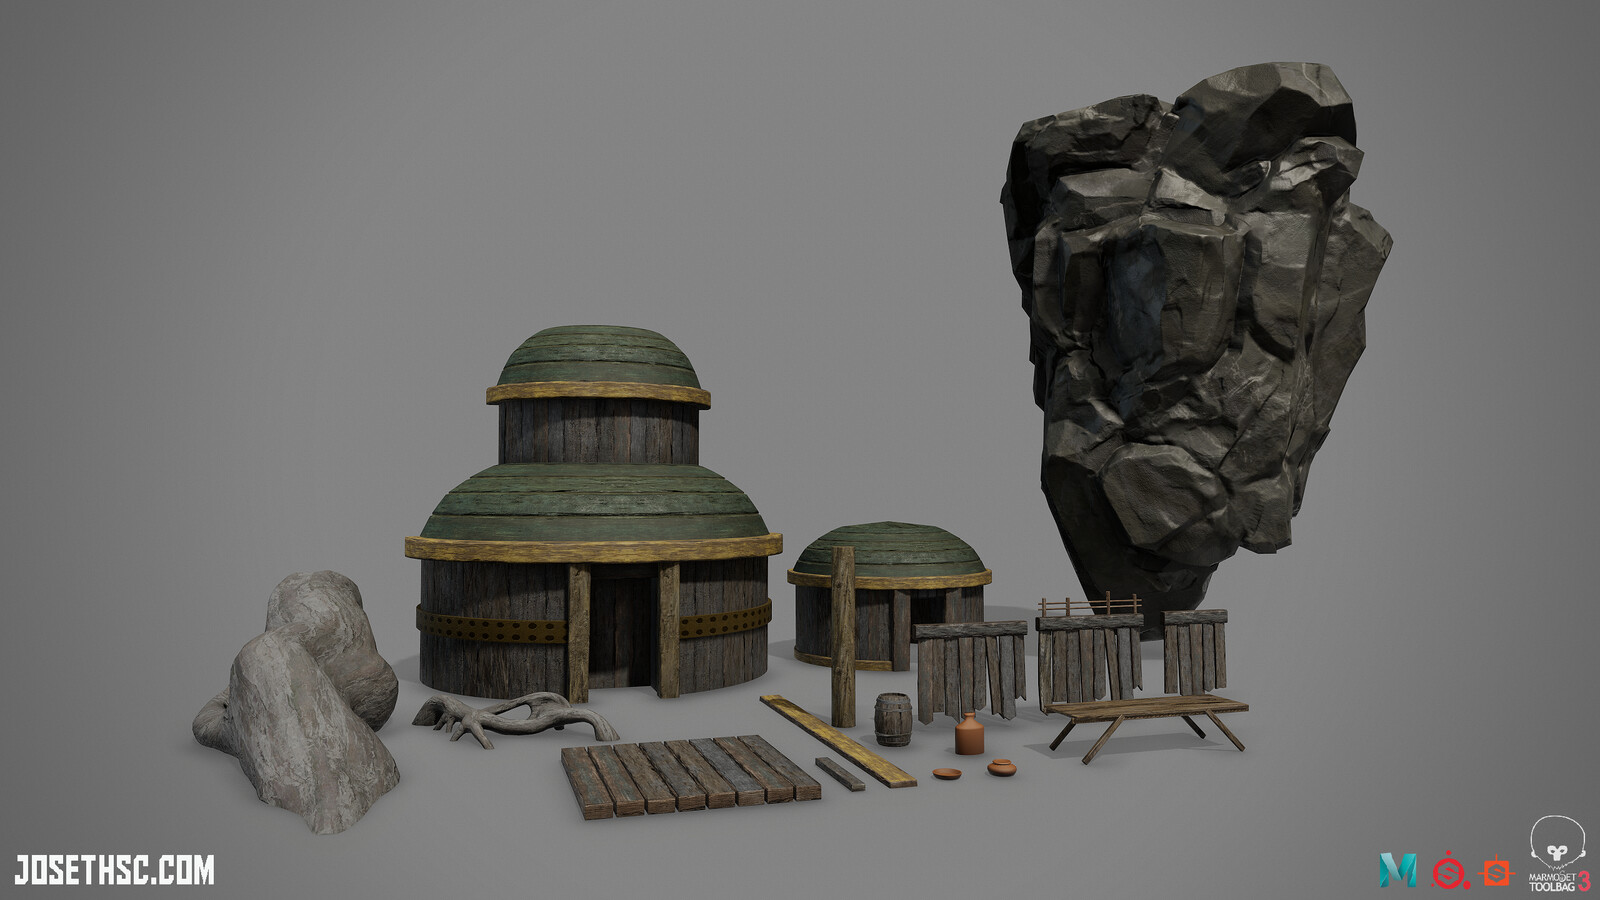 Overview of some of the models I created